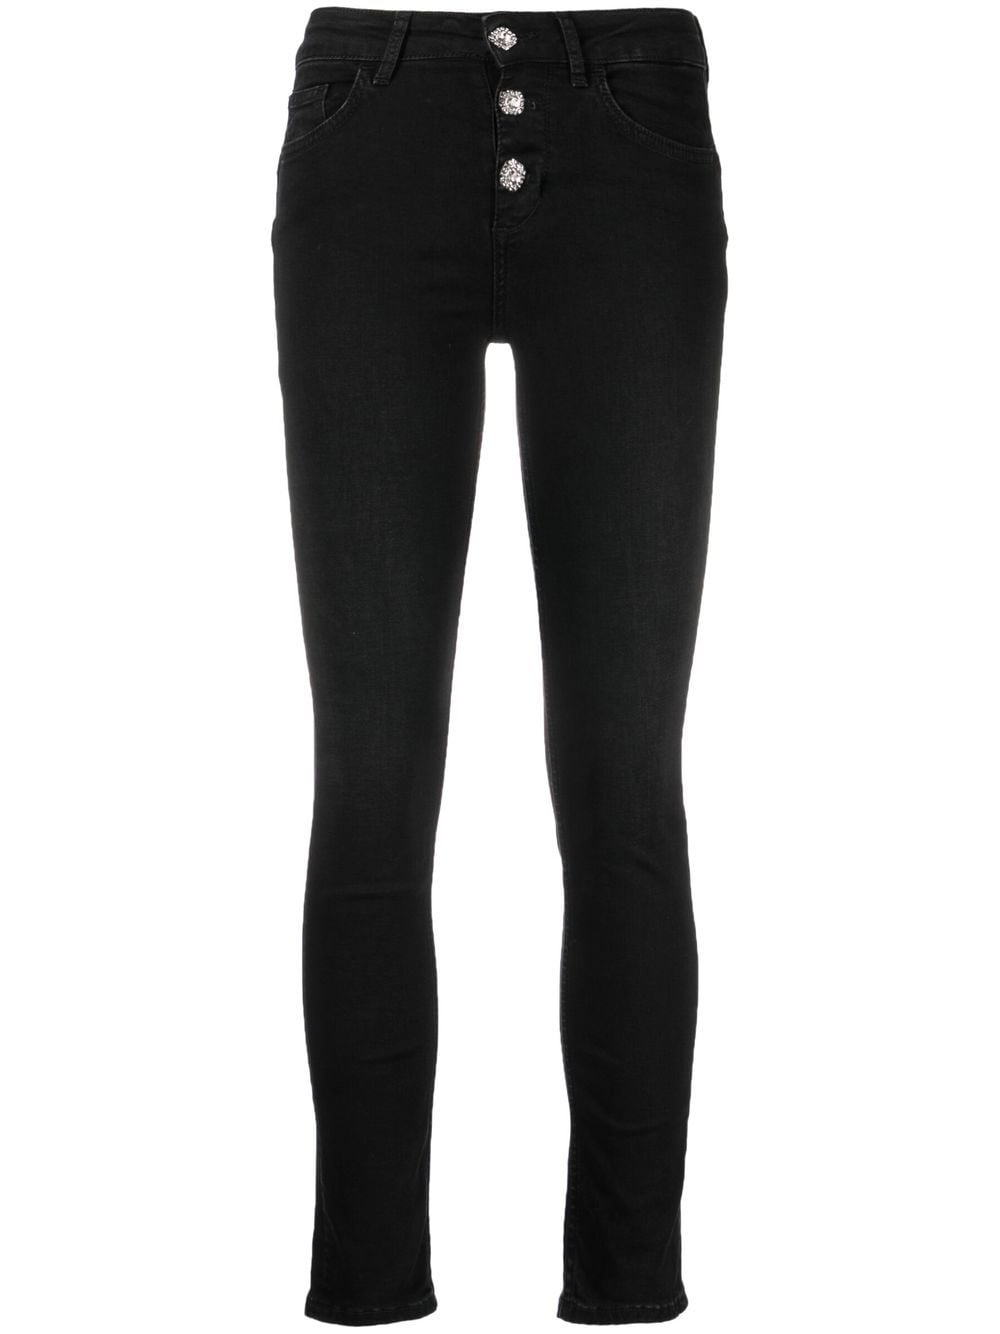 Black Crystal-button cropped skinny jeans Farfetch Women Clothing Jeans Skinny Jeans 